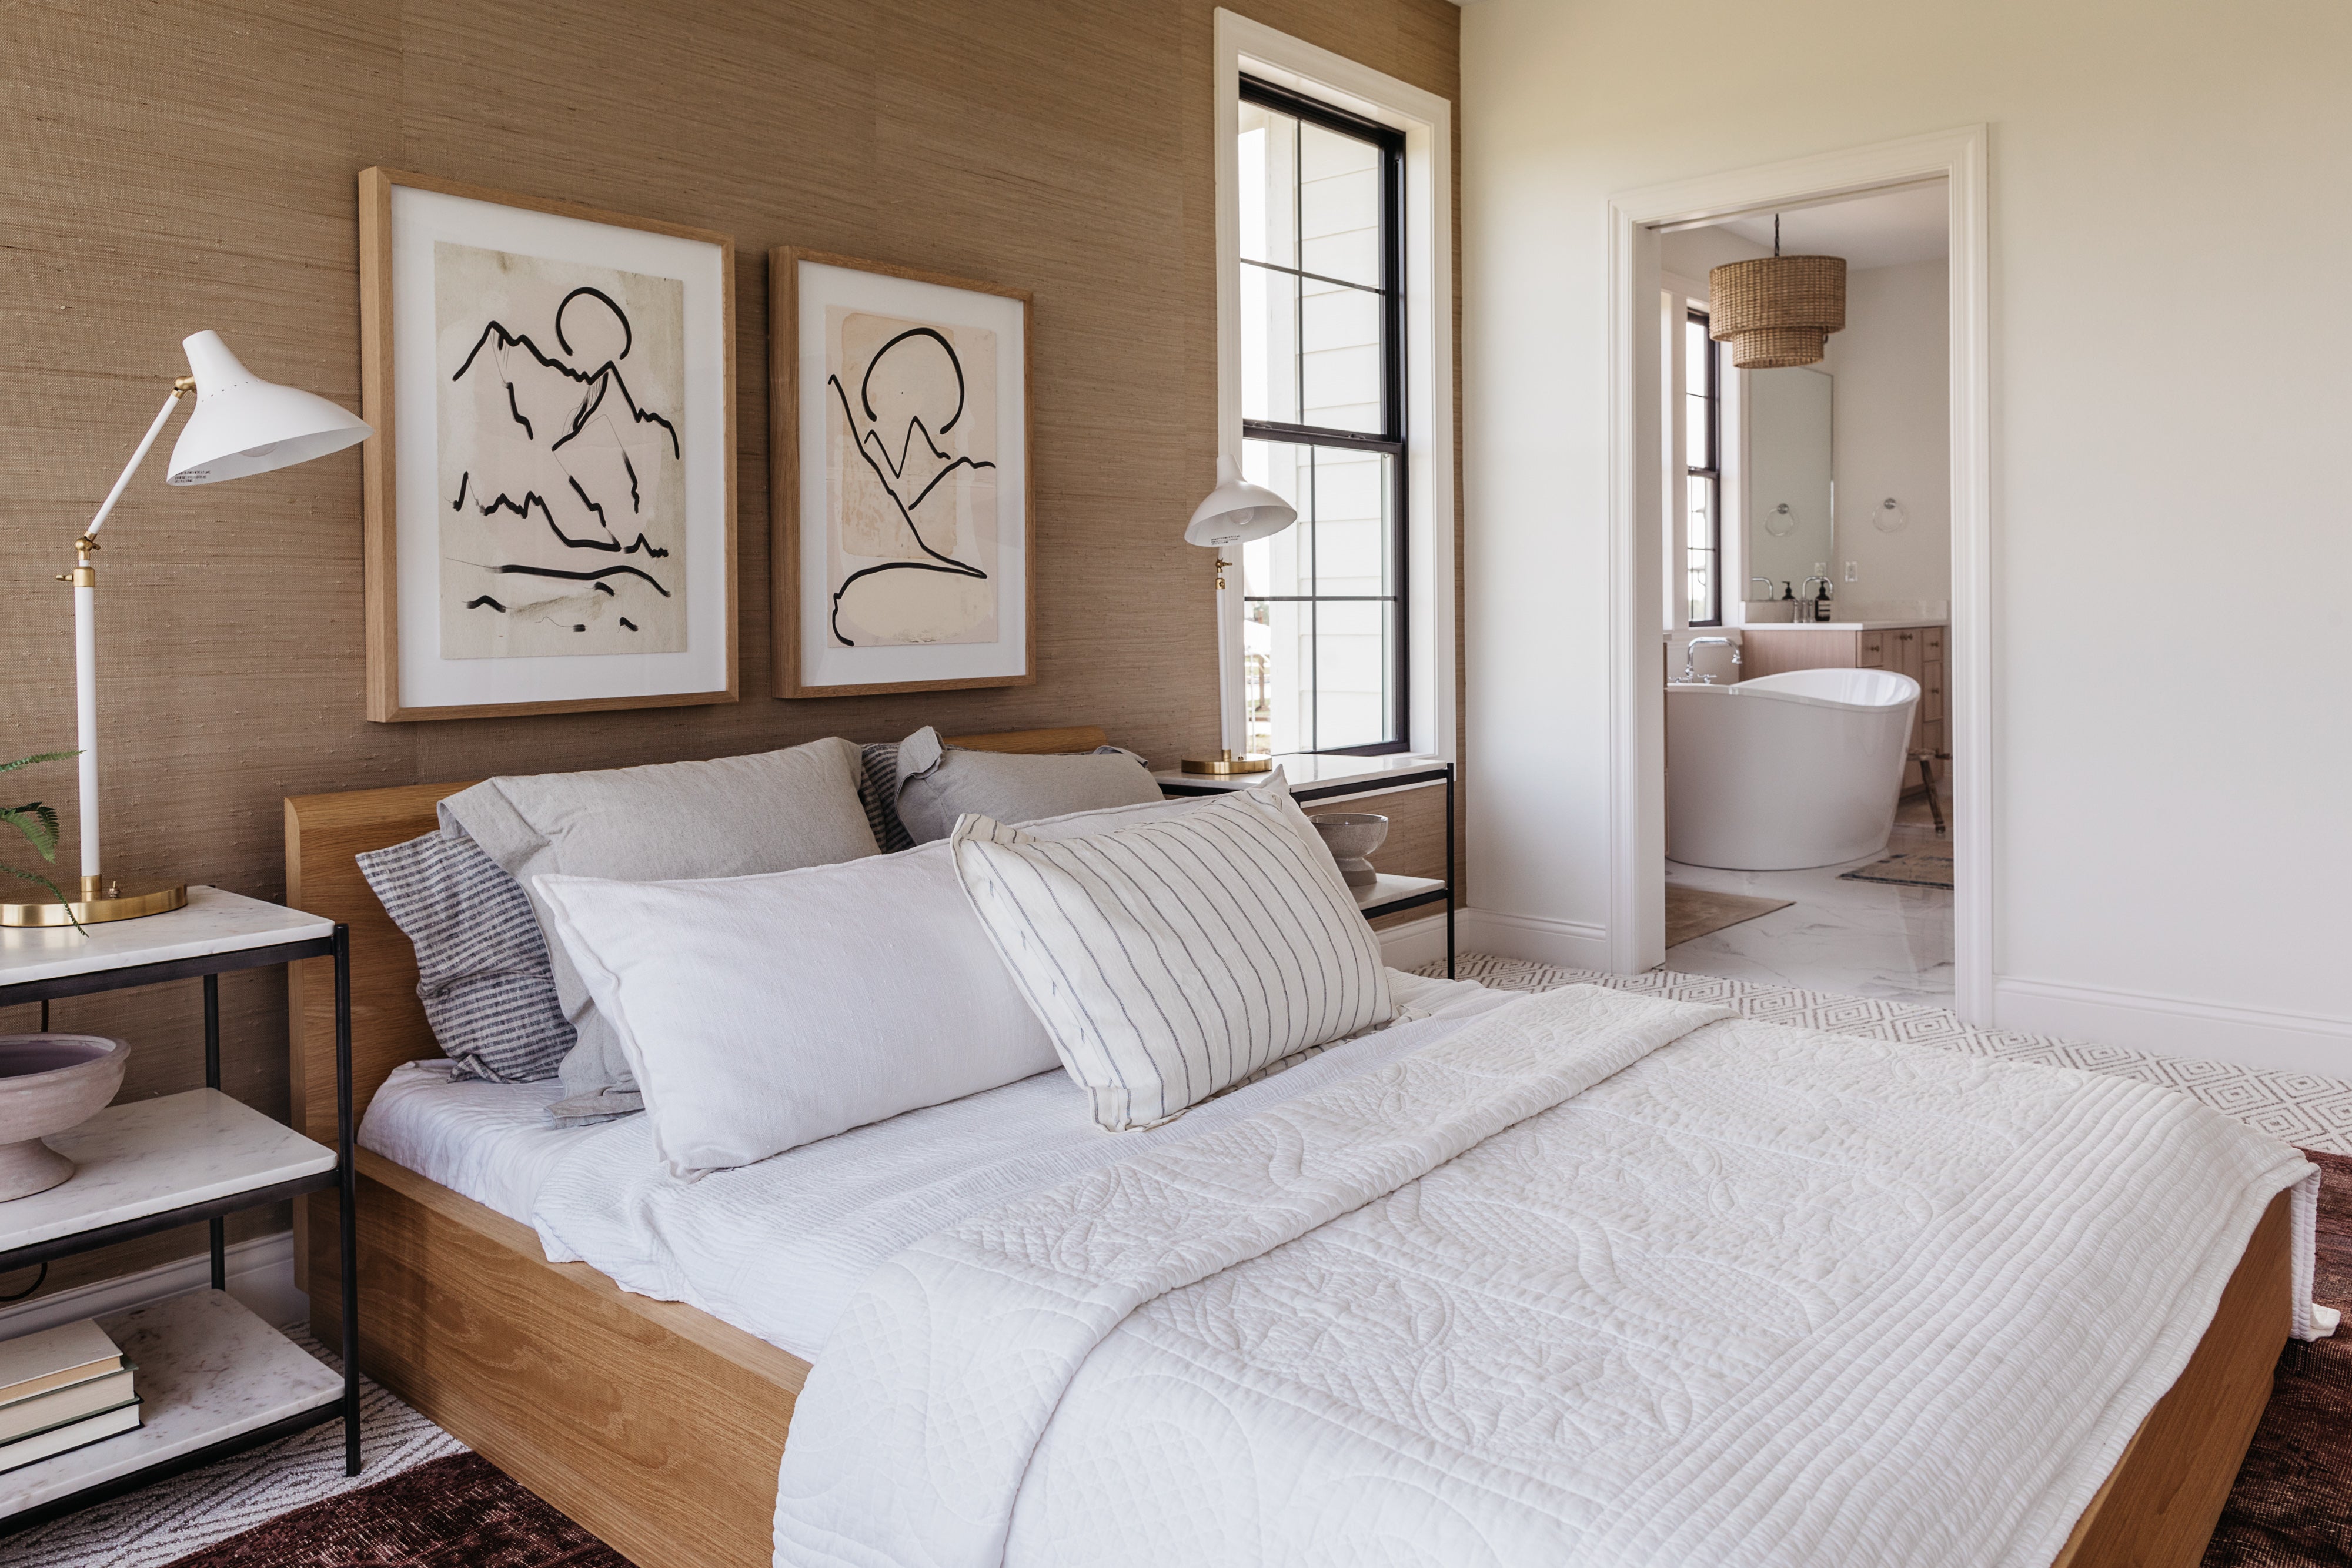 Warm Organic Bedroom: Grasscloth Wallpaper, Tea Stained Art, and Marble Accents